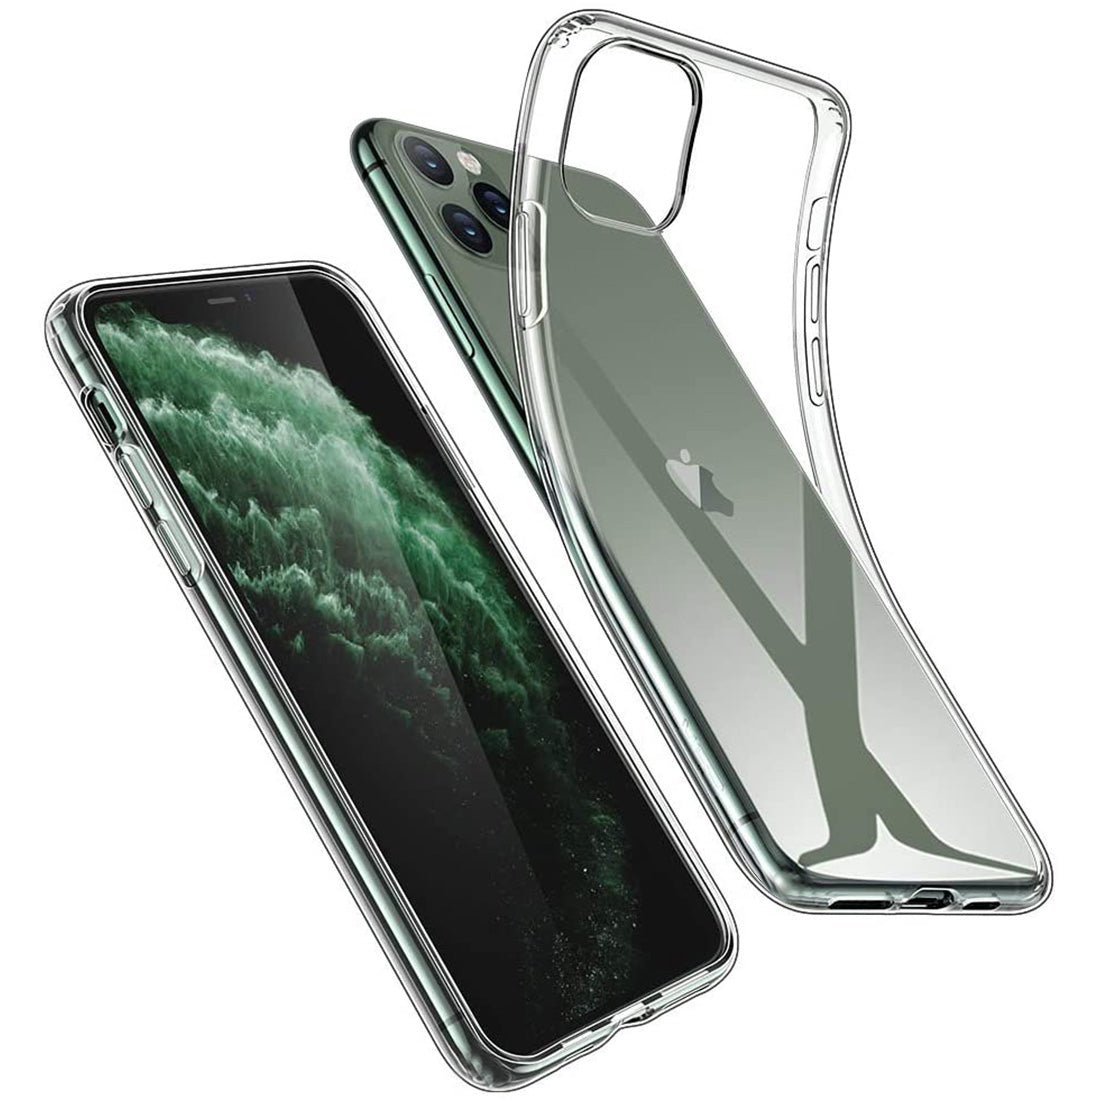 Super Clear Back Case Cover for Apple iPhone 11 Pro Max